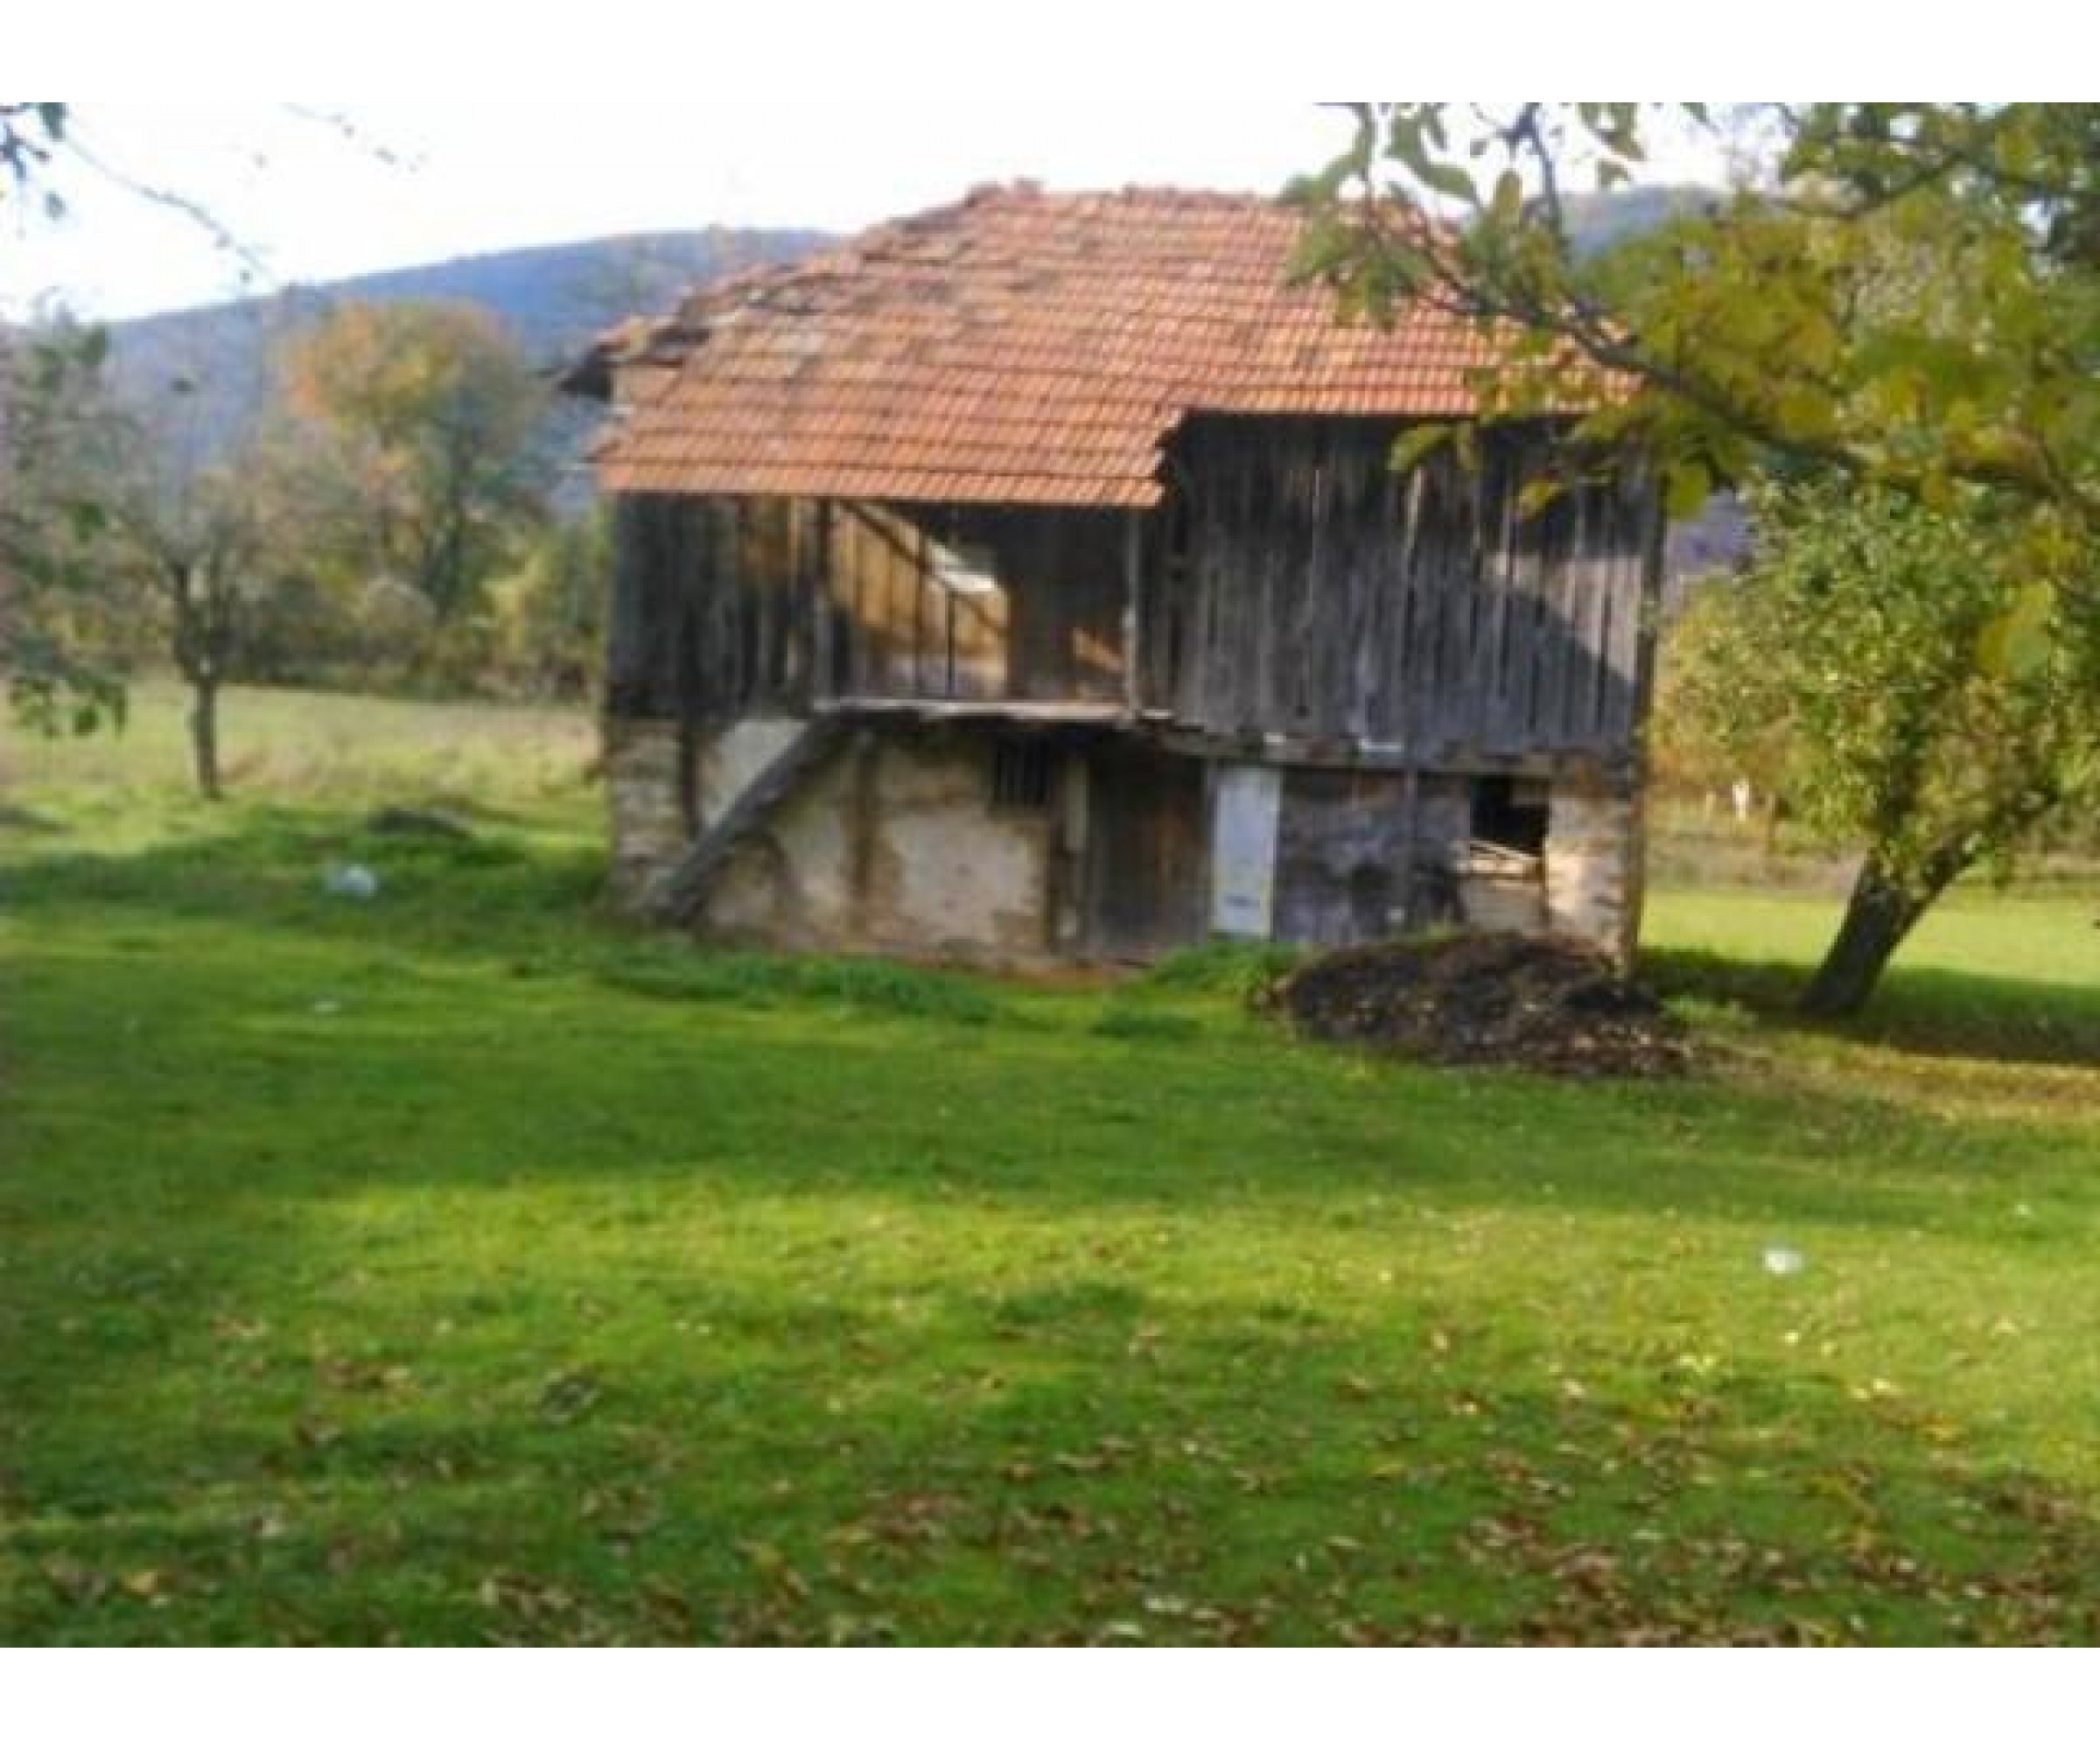 Two-storey barn in the village of Asen